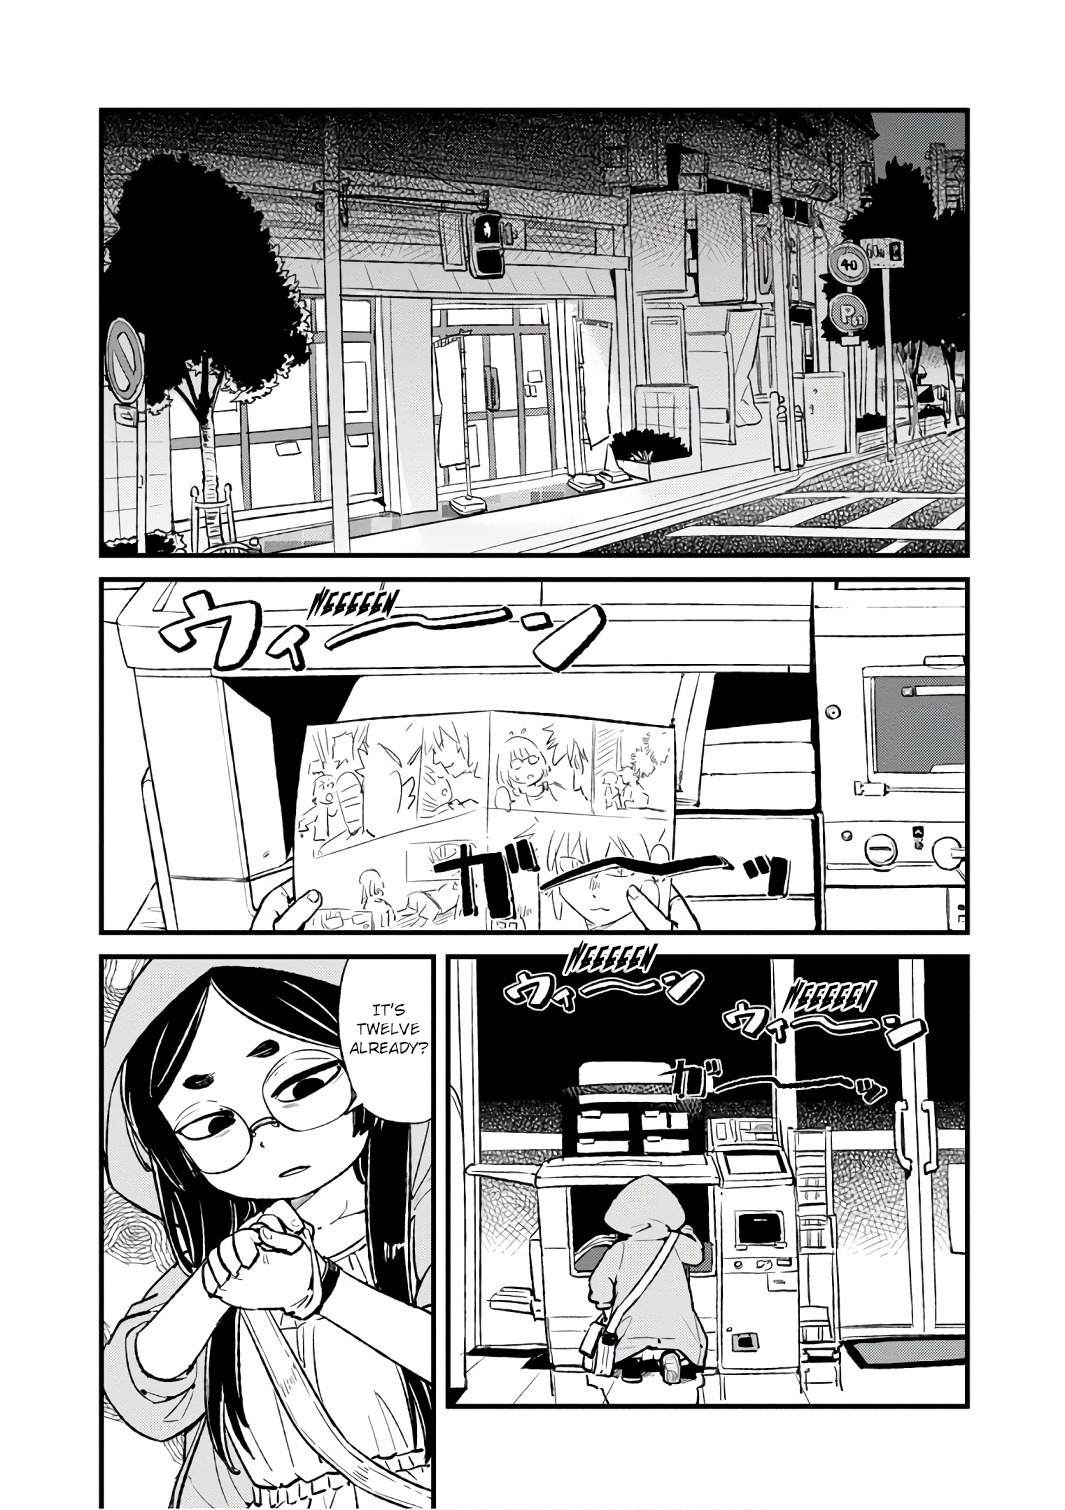 Neko Musume Michikusa Nikki Vol. 17 Ch. 104 Passing the Time Making Photocopies at the Convenience Store